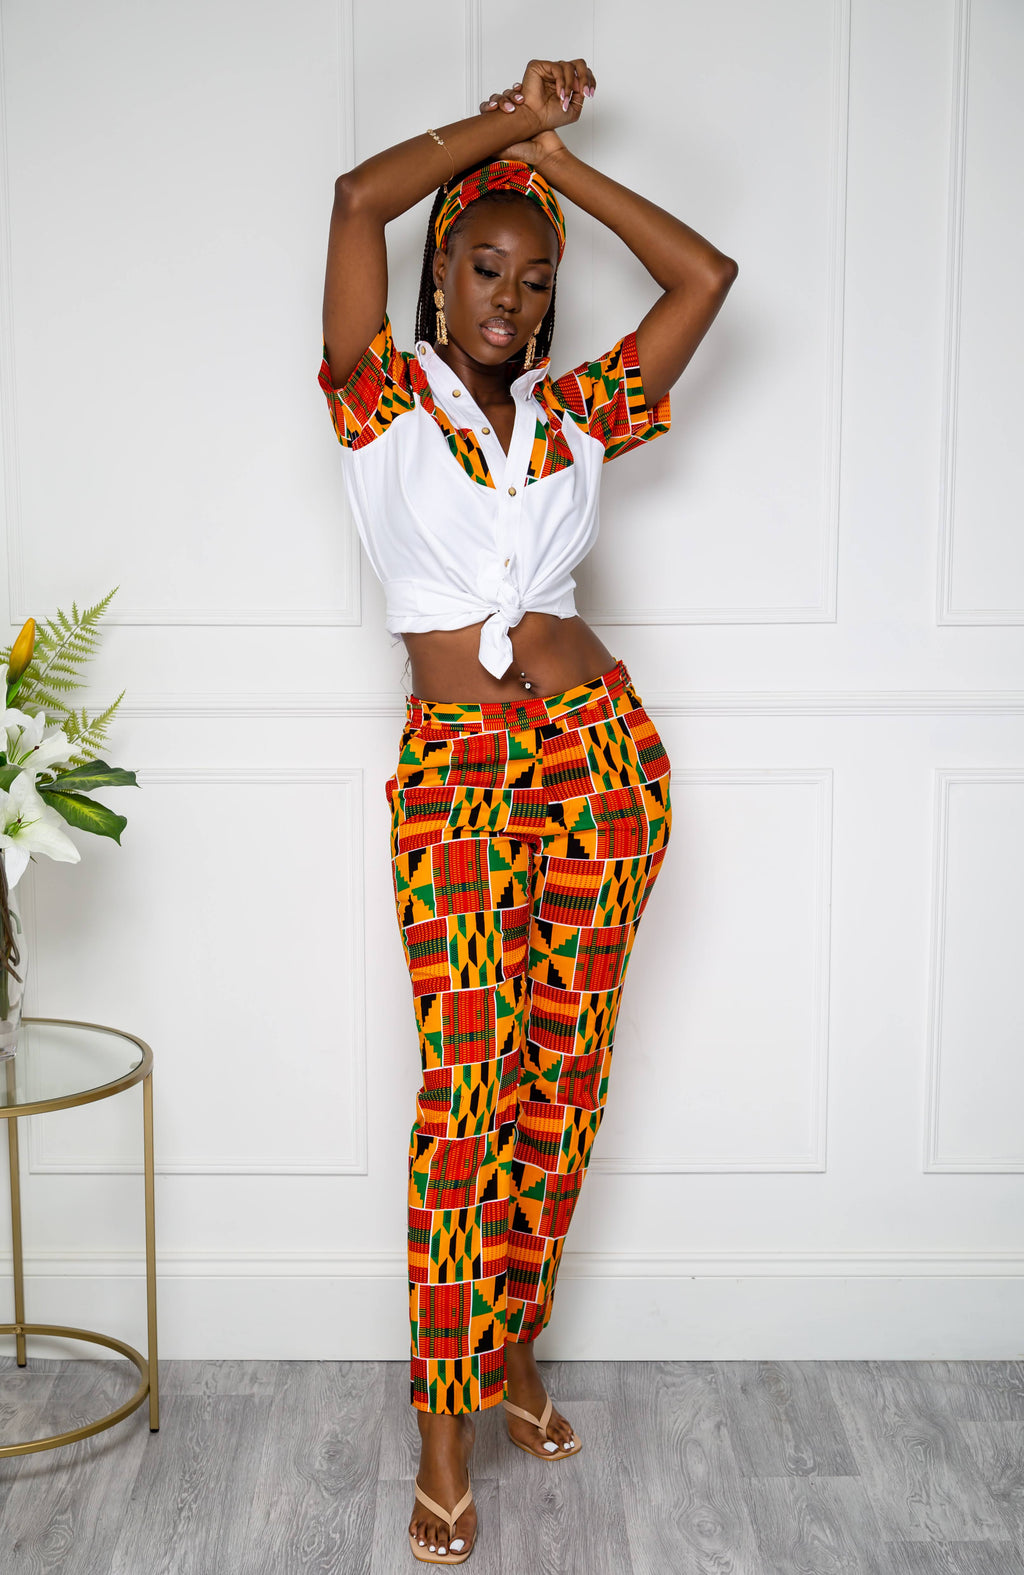 Women African Print Trouser with Top Set  Frenzy African Fashions –  FrenzyAfricanFashion.com